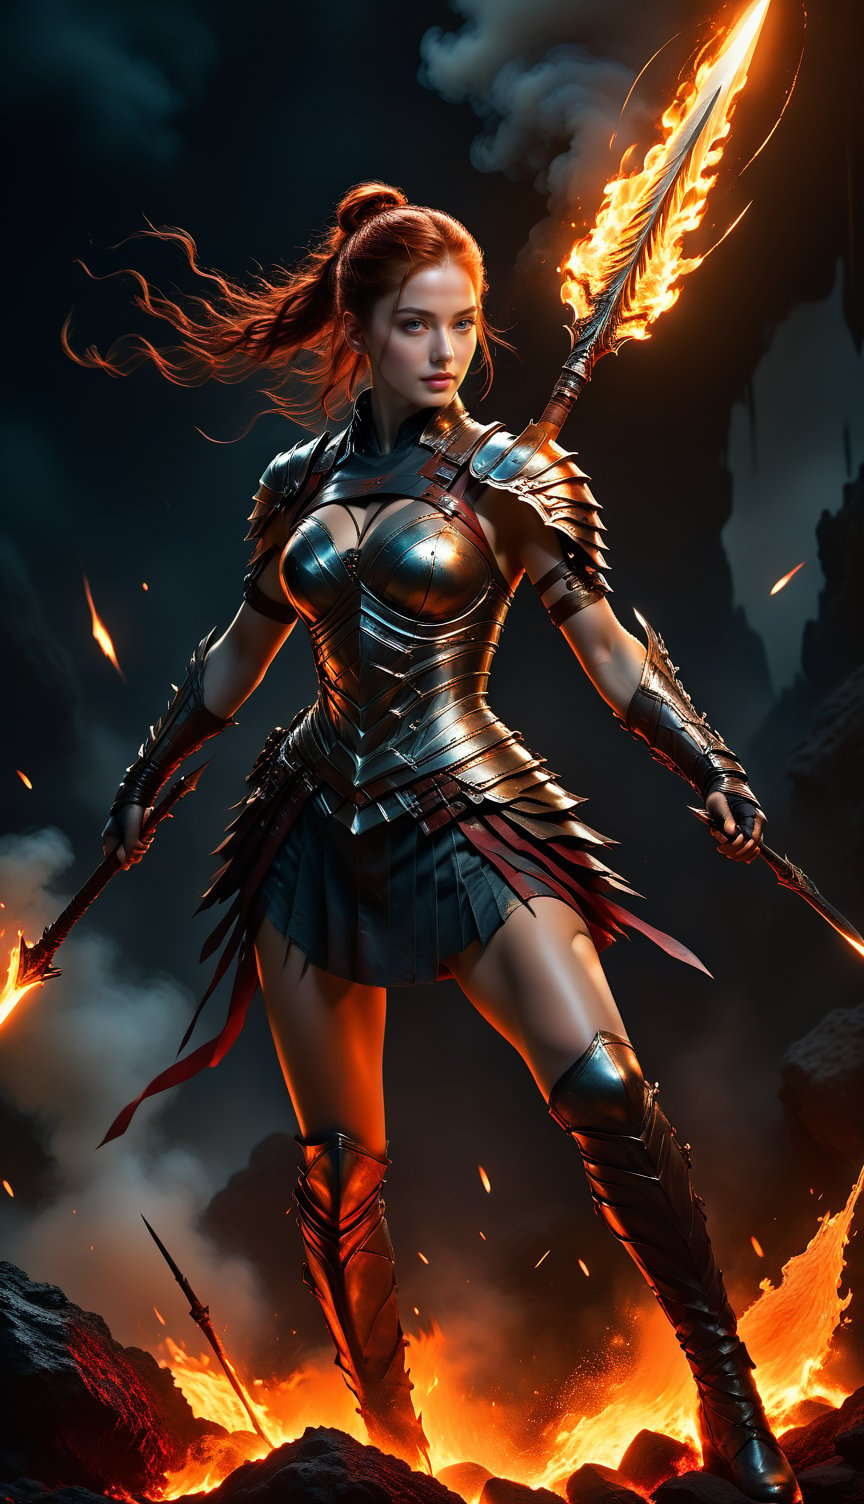 score_9, score_8_up, score_7_up, Raw photo, A fighting goddess holding the center of a spear, full body, fighting pose, crimson lipstick on her lips, perfect face, perfect proportions, (chestnut hair tied up in a ponytail, wearing a fitted damaged leather armor), low angle, painted at a 45 degree angle, fantastical, fantasy, by Kahn Griffith, Aaron Hawkey, Greg Rutkowski, amazing depth, surreal, exquisite detail, deep depth of field, perfect balance, artistic photorealism, molten lava at her feet, flames rising in the dark night sky, five fingers, a magnificent masterpiece with a terrifying power, a composition with depth,cinematic style,perfect hand